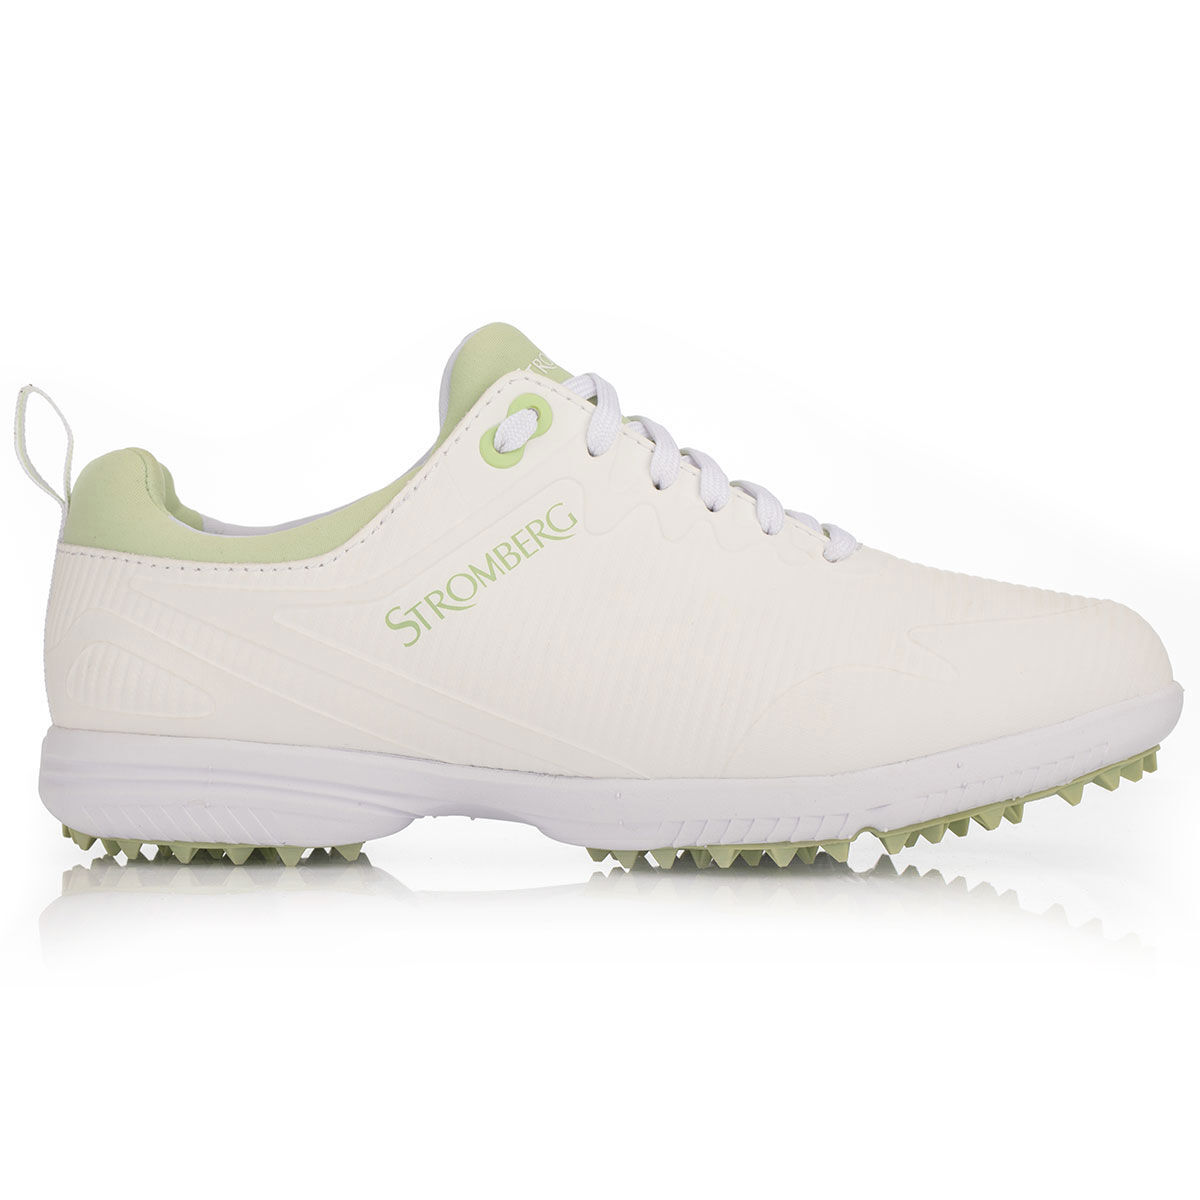 Stromberg White Tempo Golf Shoes, Womens | American Golf, Size: 4